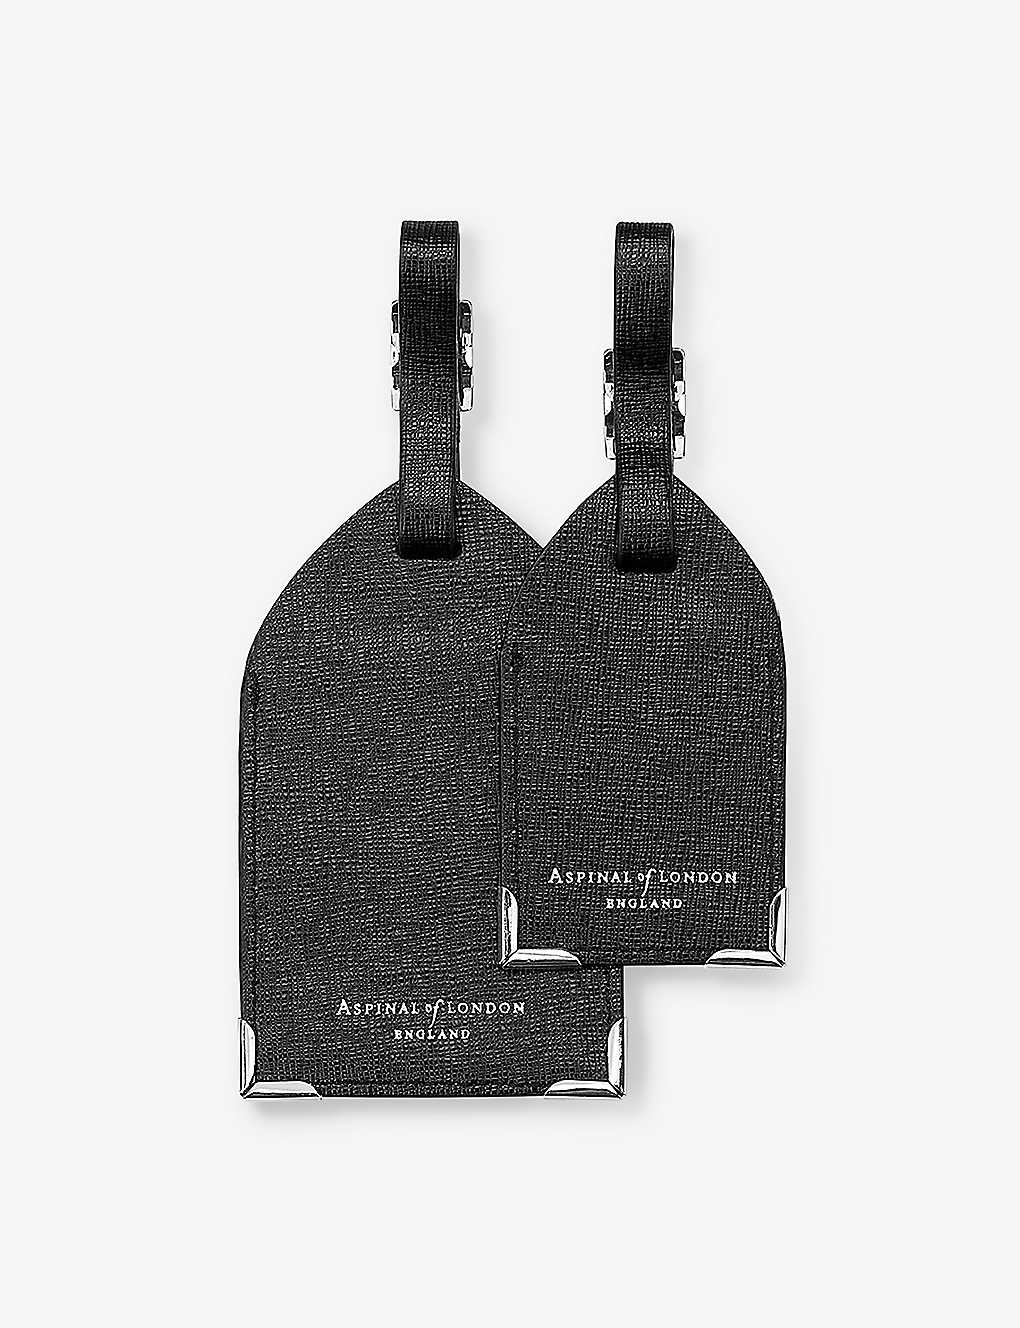 Aspinal Of London Set Of Two Luggage Tags Black Saffiano